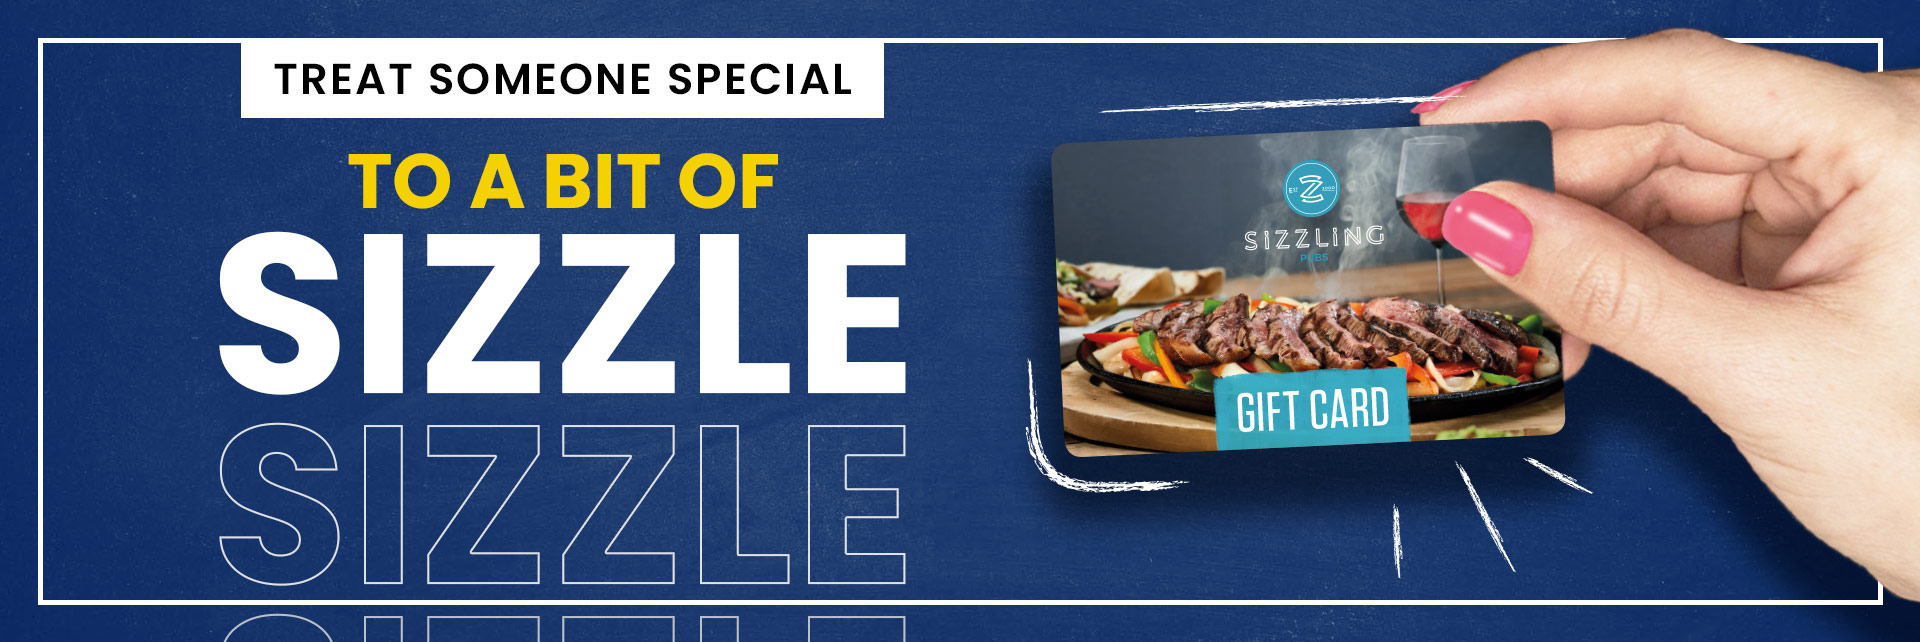 Sizzling Pubs Gift Card at The Traveller's Rest in Reading